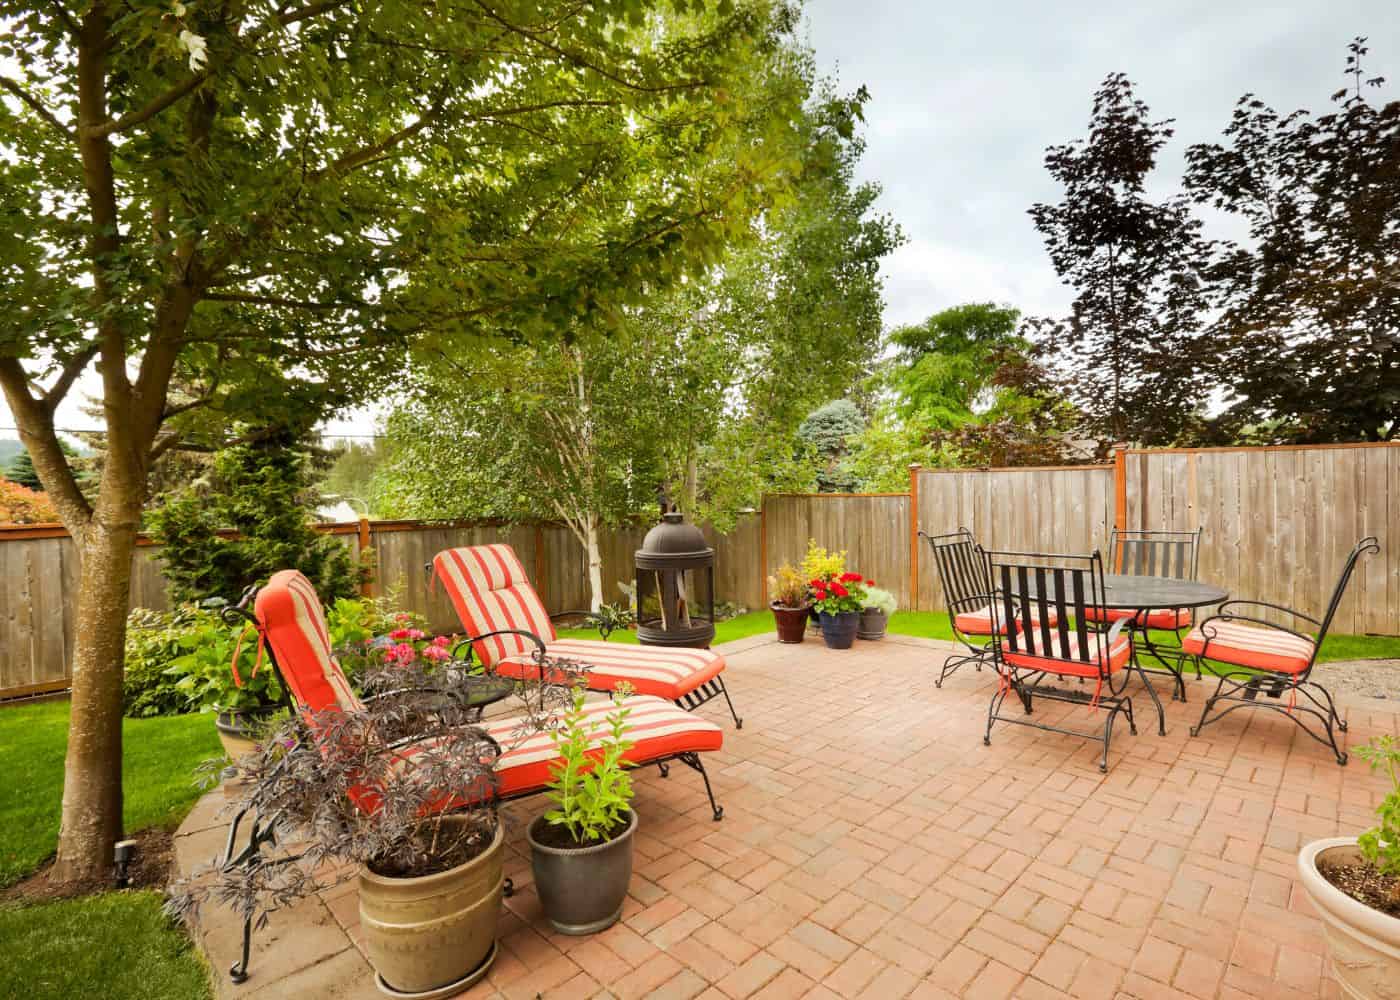 Best trees for backyard patio